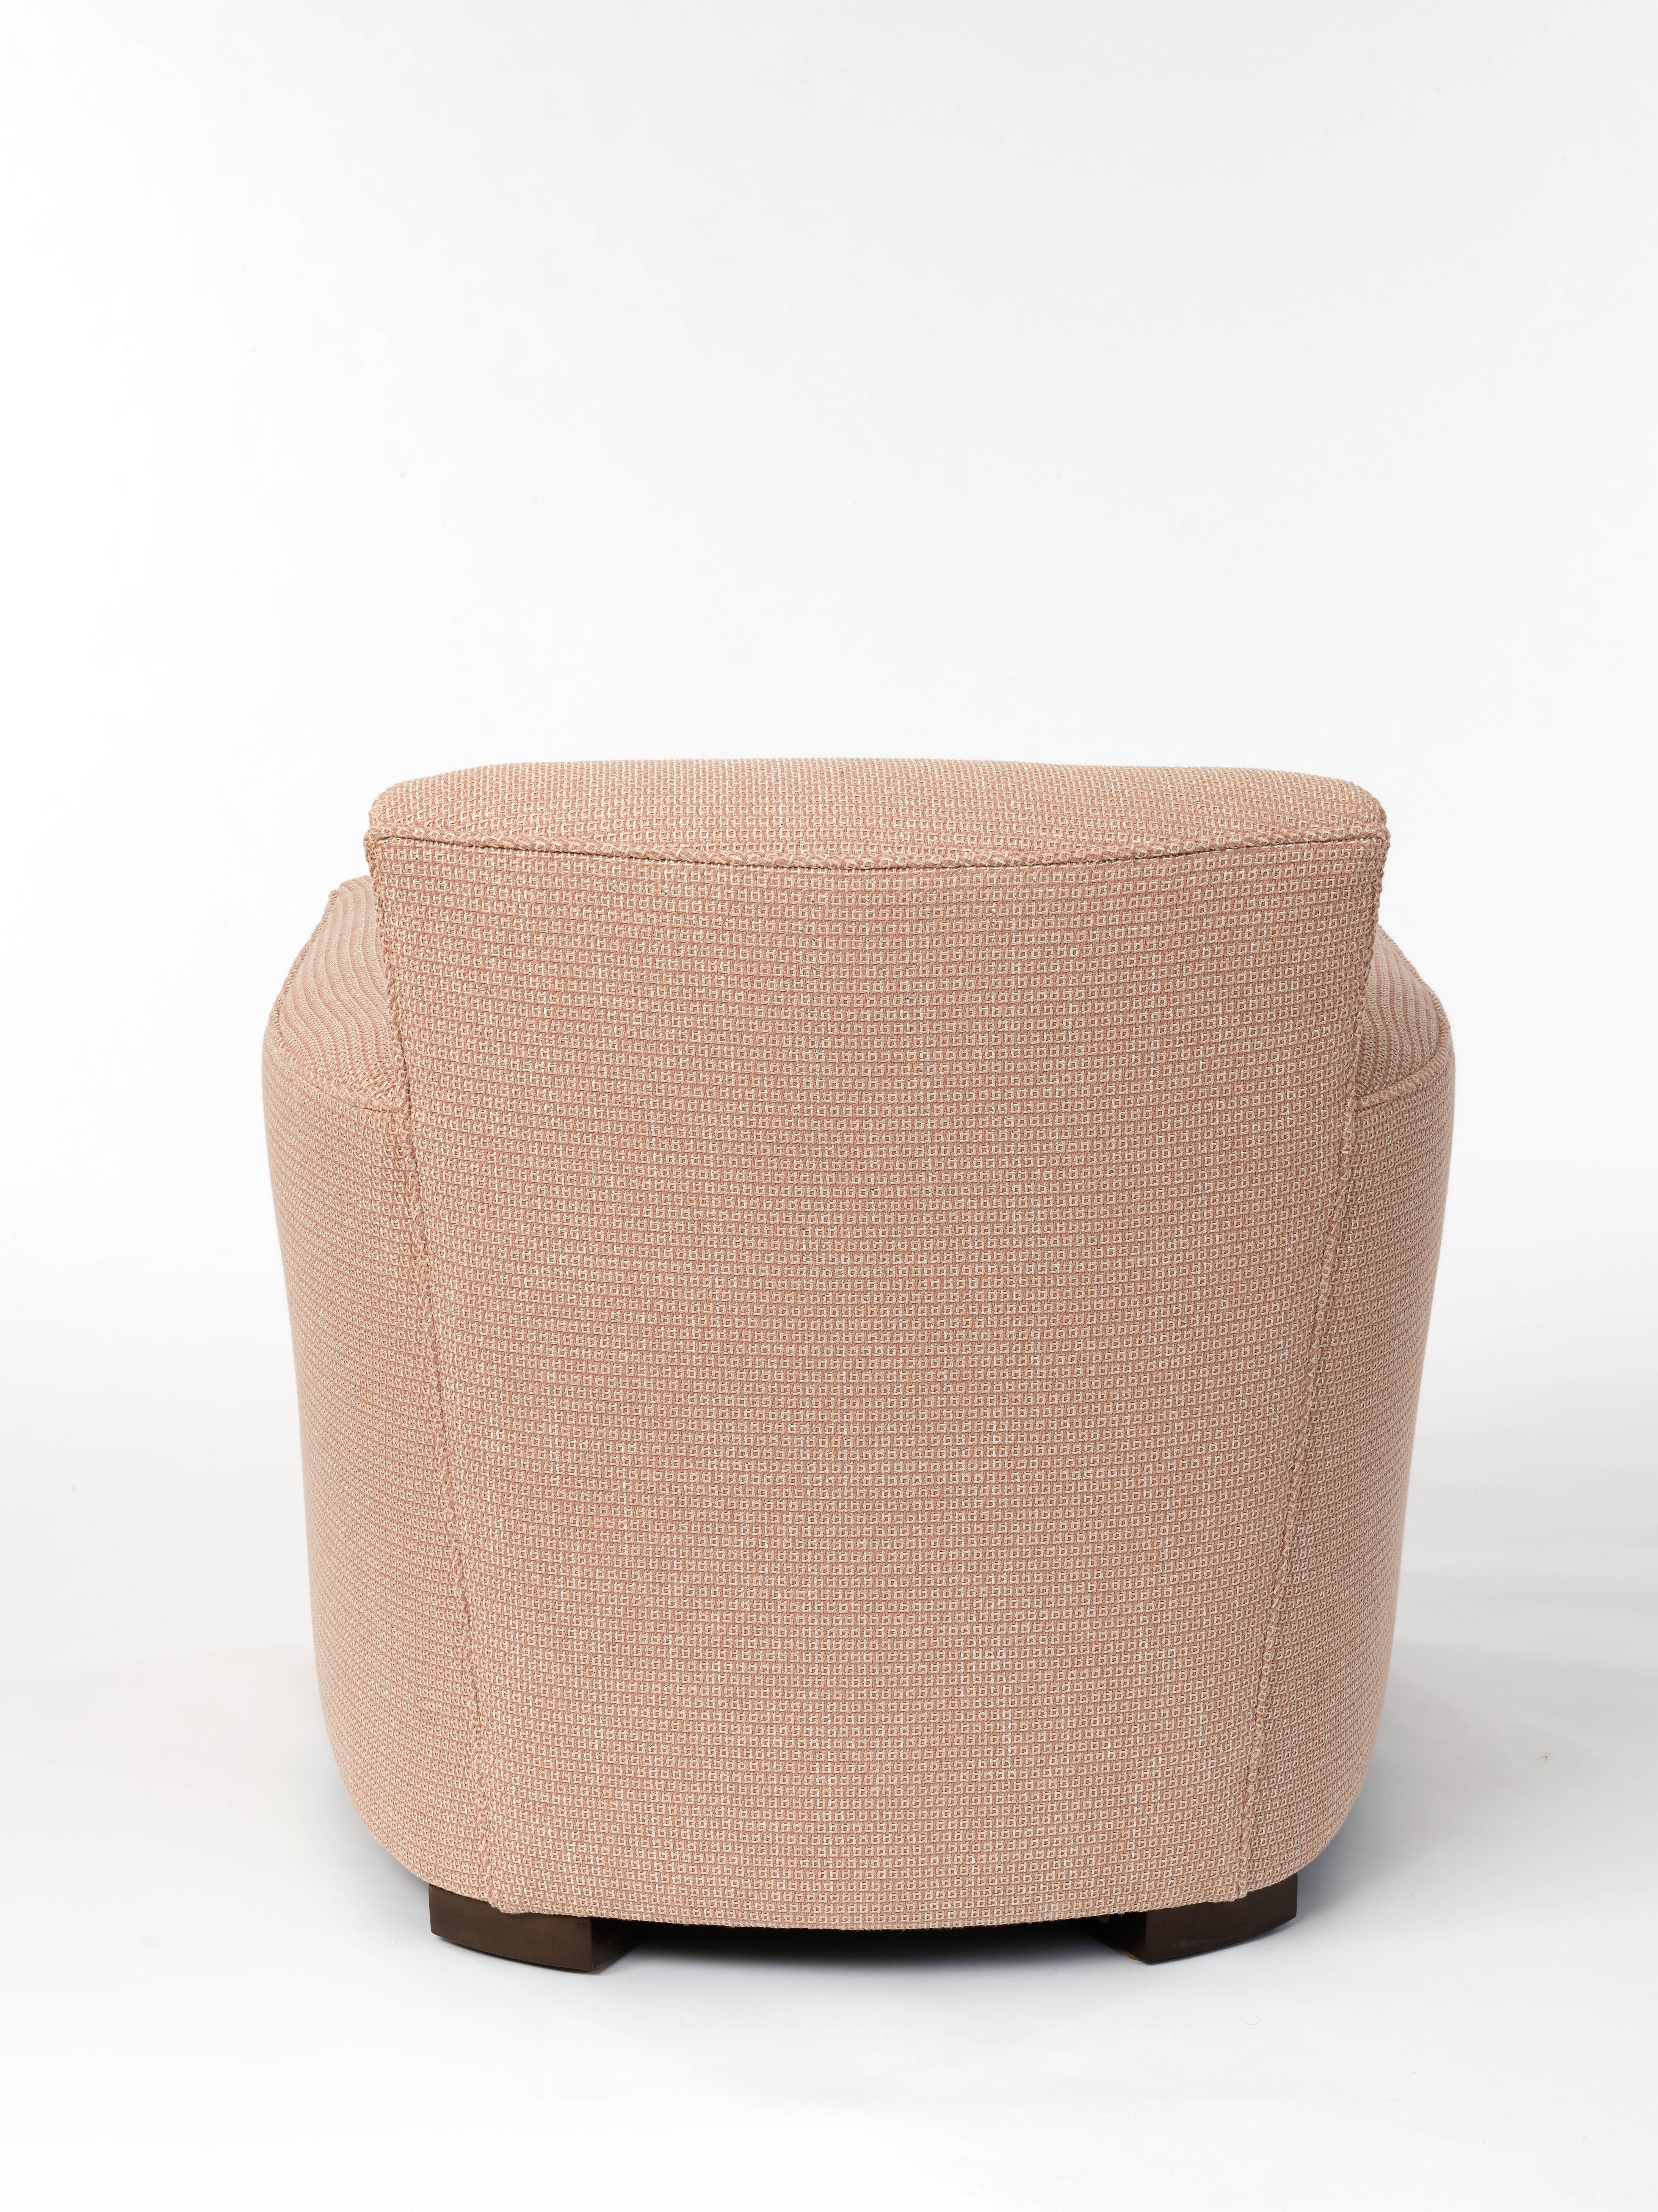 American Donghia Noble Chair in Blush Pink Cotton Upholstery with Geometric Pattern For Sale